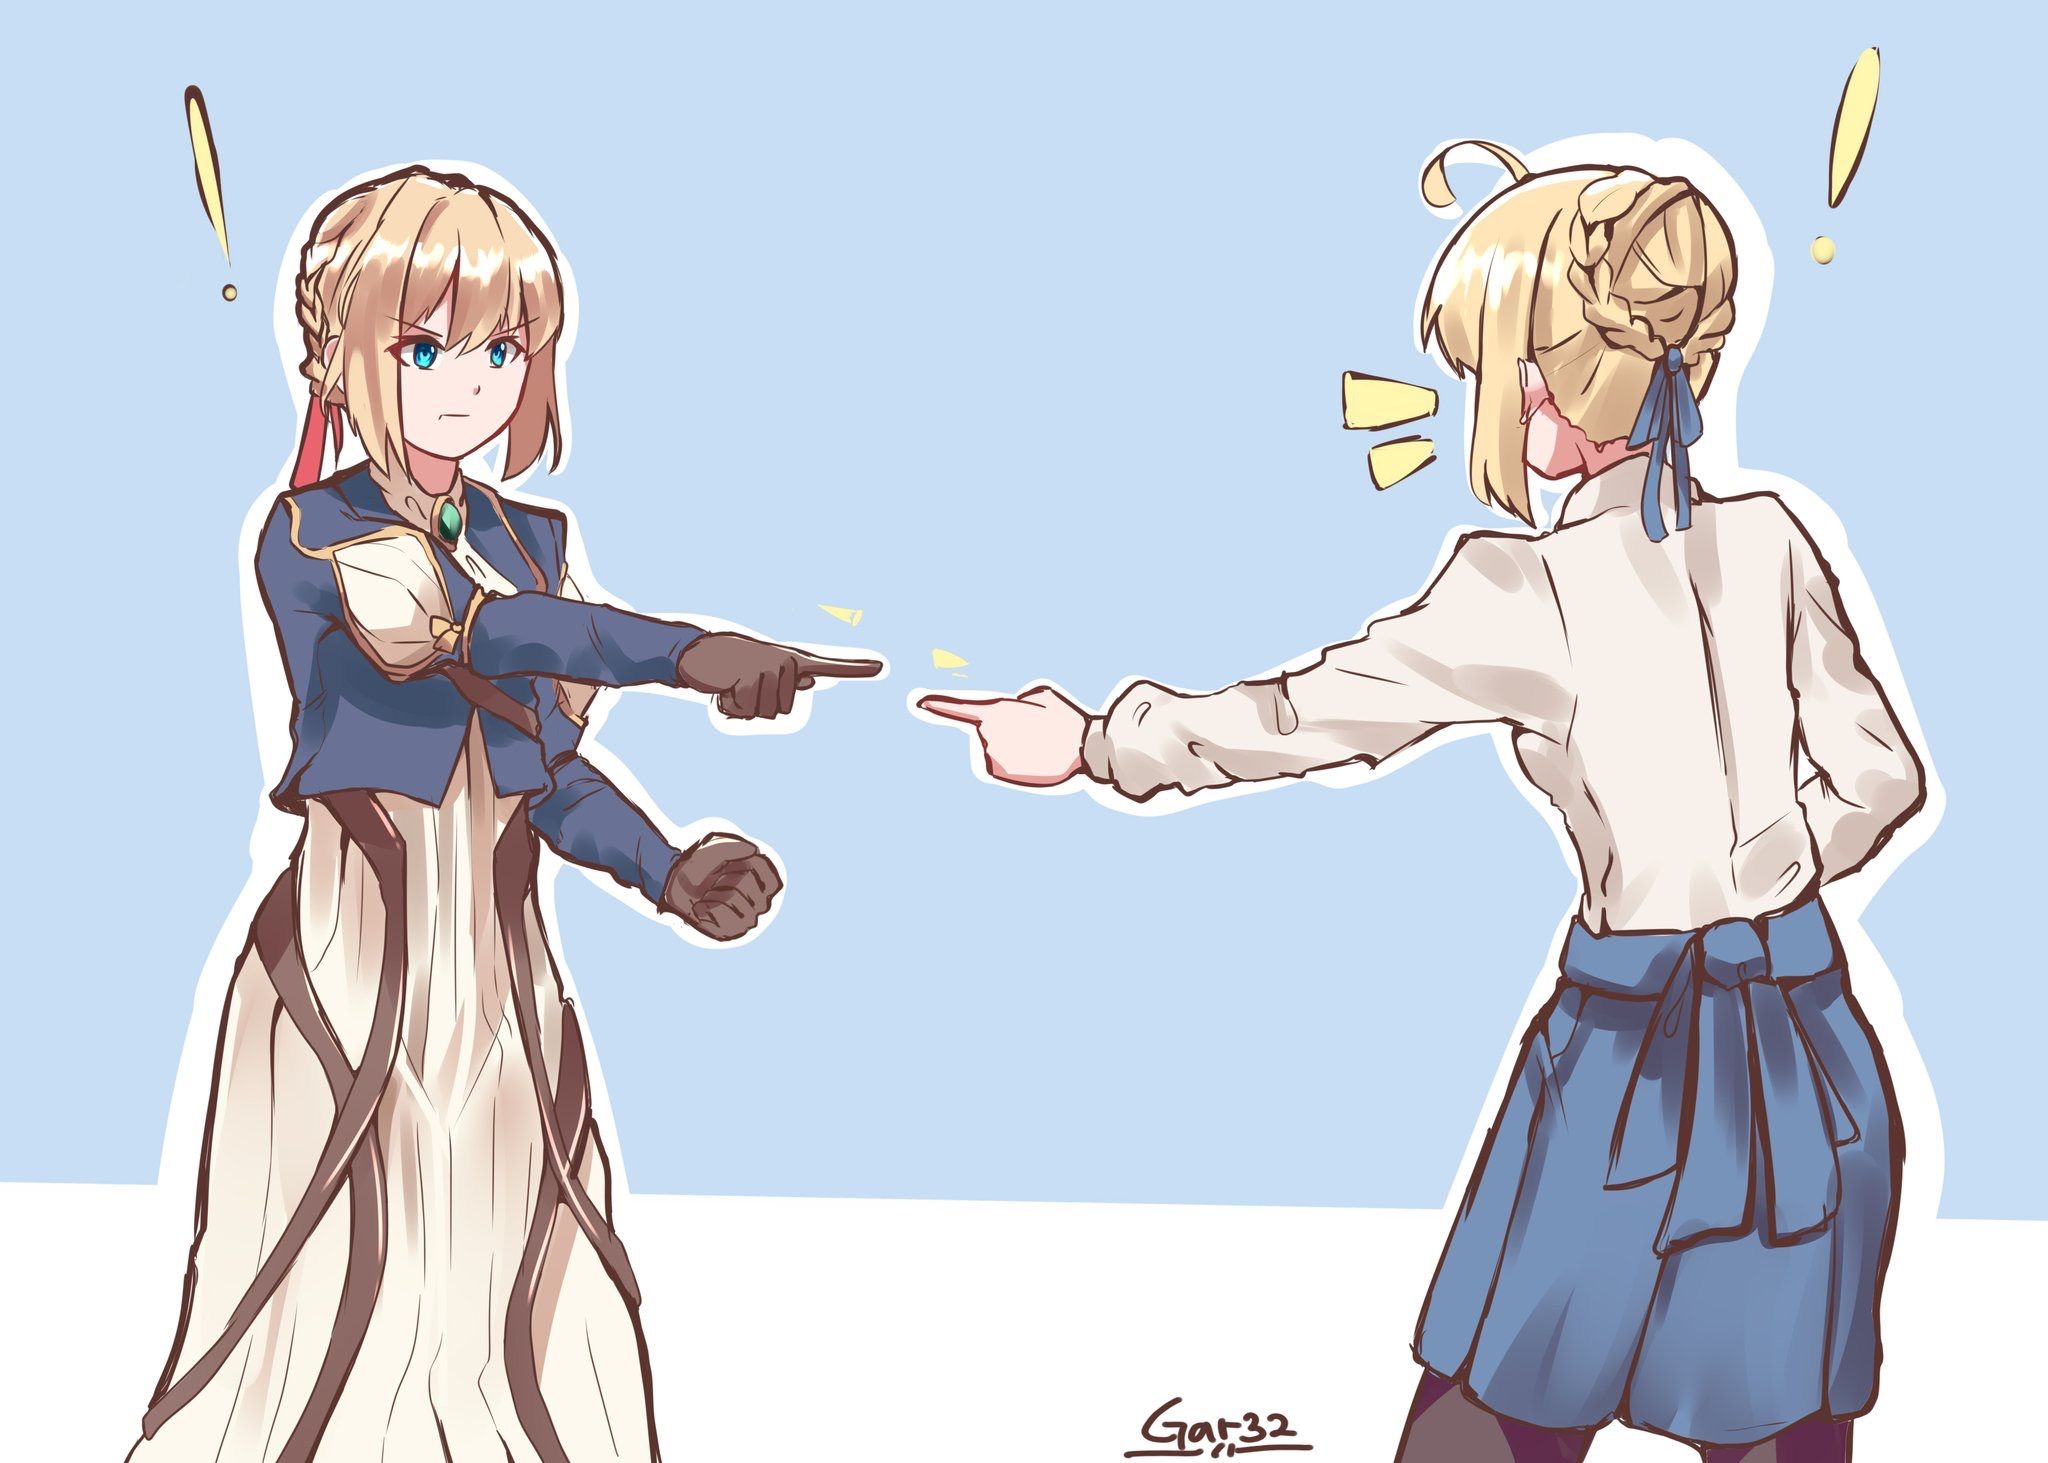 Fate Stay Night Violet Evergarden Anime Saber Violet Evergarden Anime Girls Crossover Fate Series Bl 2048x1463